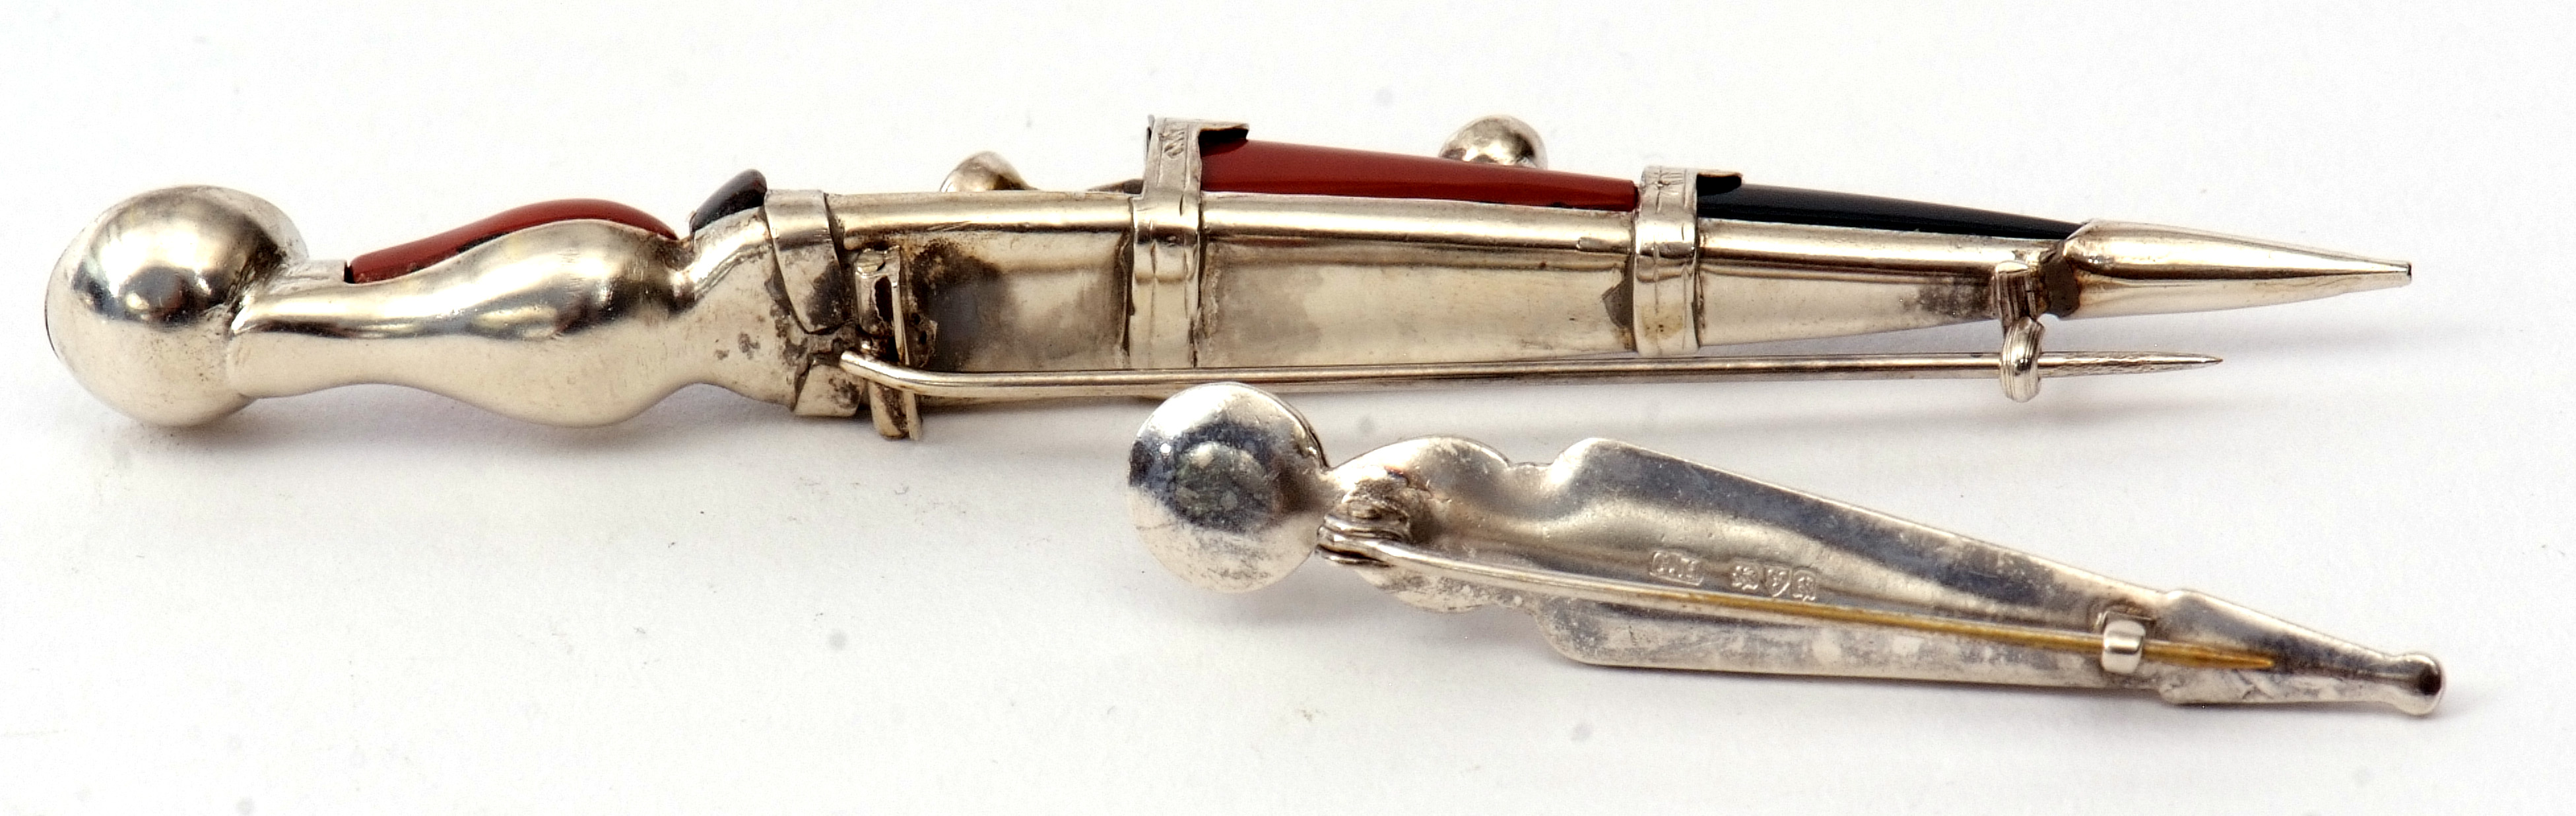 Mixed Lot: hallmarked silver Scottish dirk brooch, Chester 1948, maker's mark C.H, together with a - Image 2 of 2